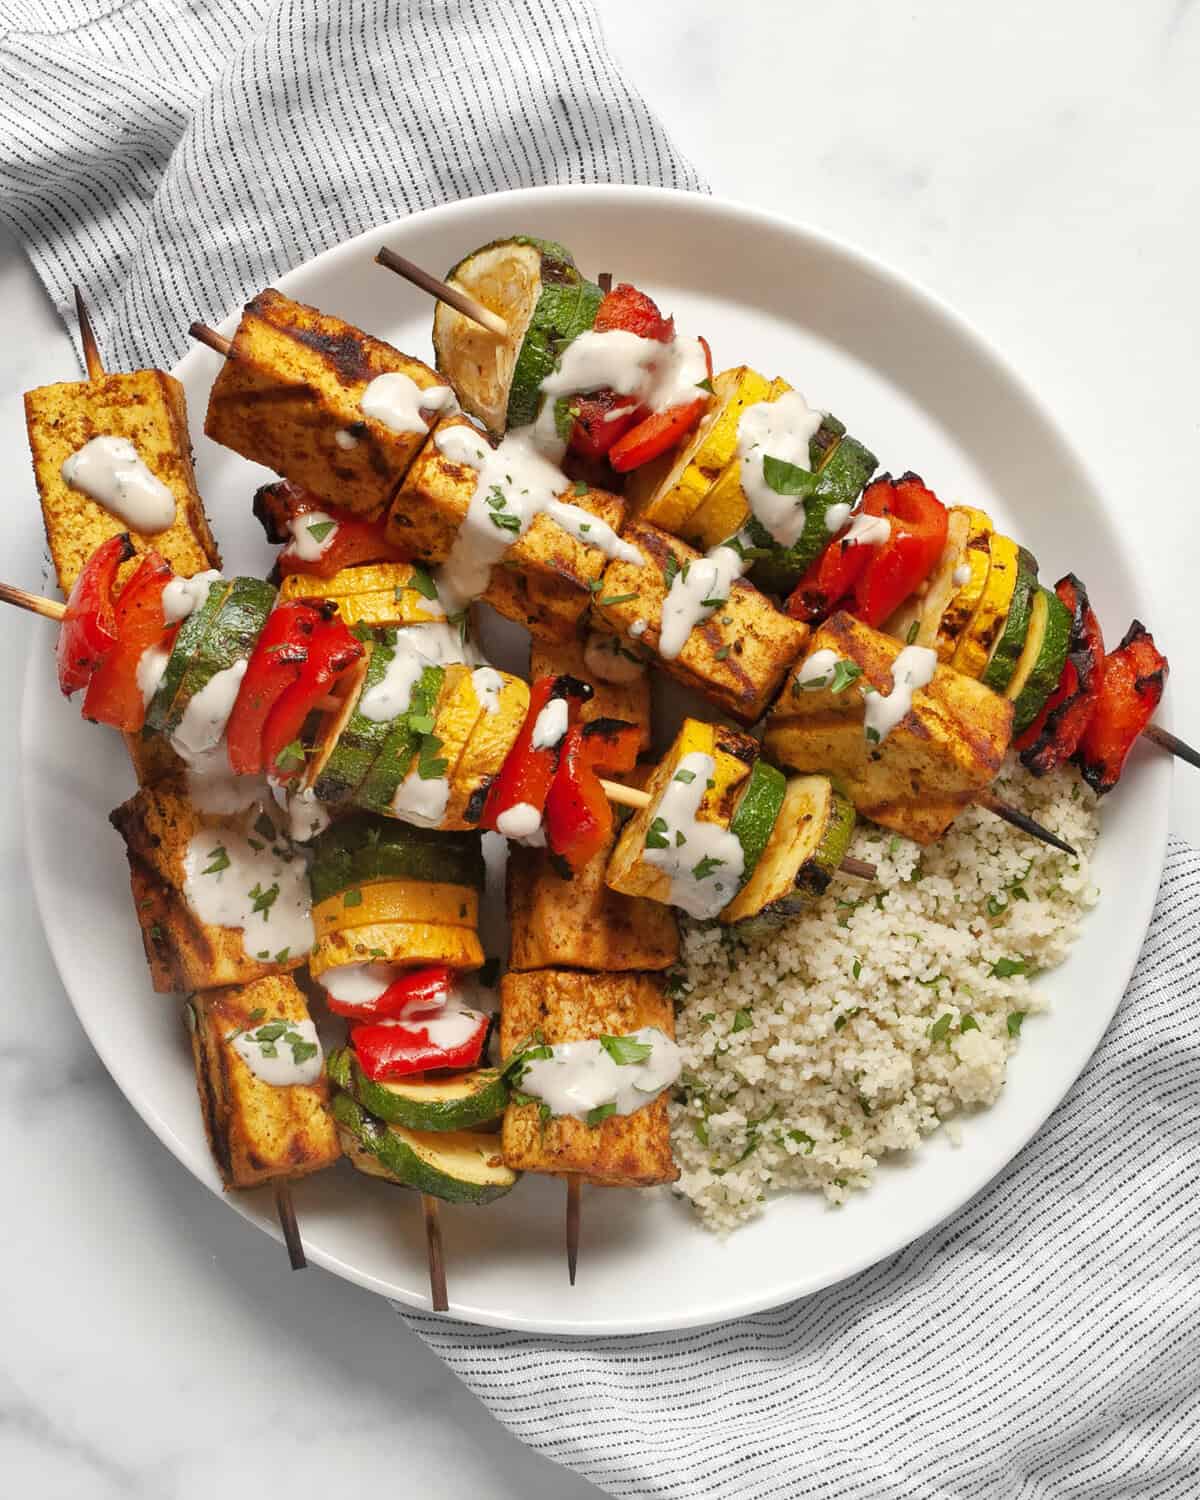 Grilled tofu and vegetable skewers with couscous on a plate.